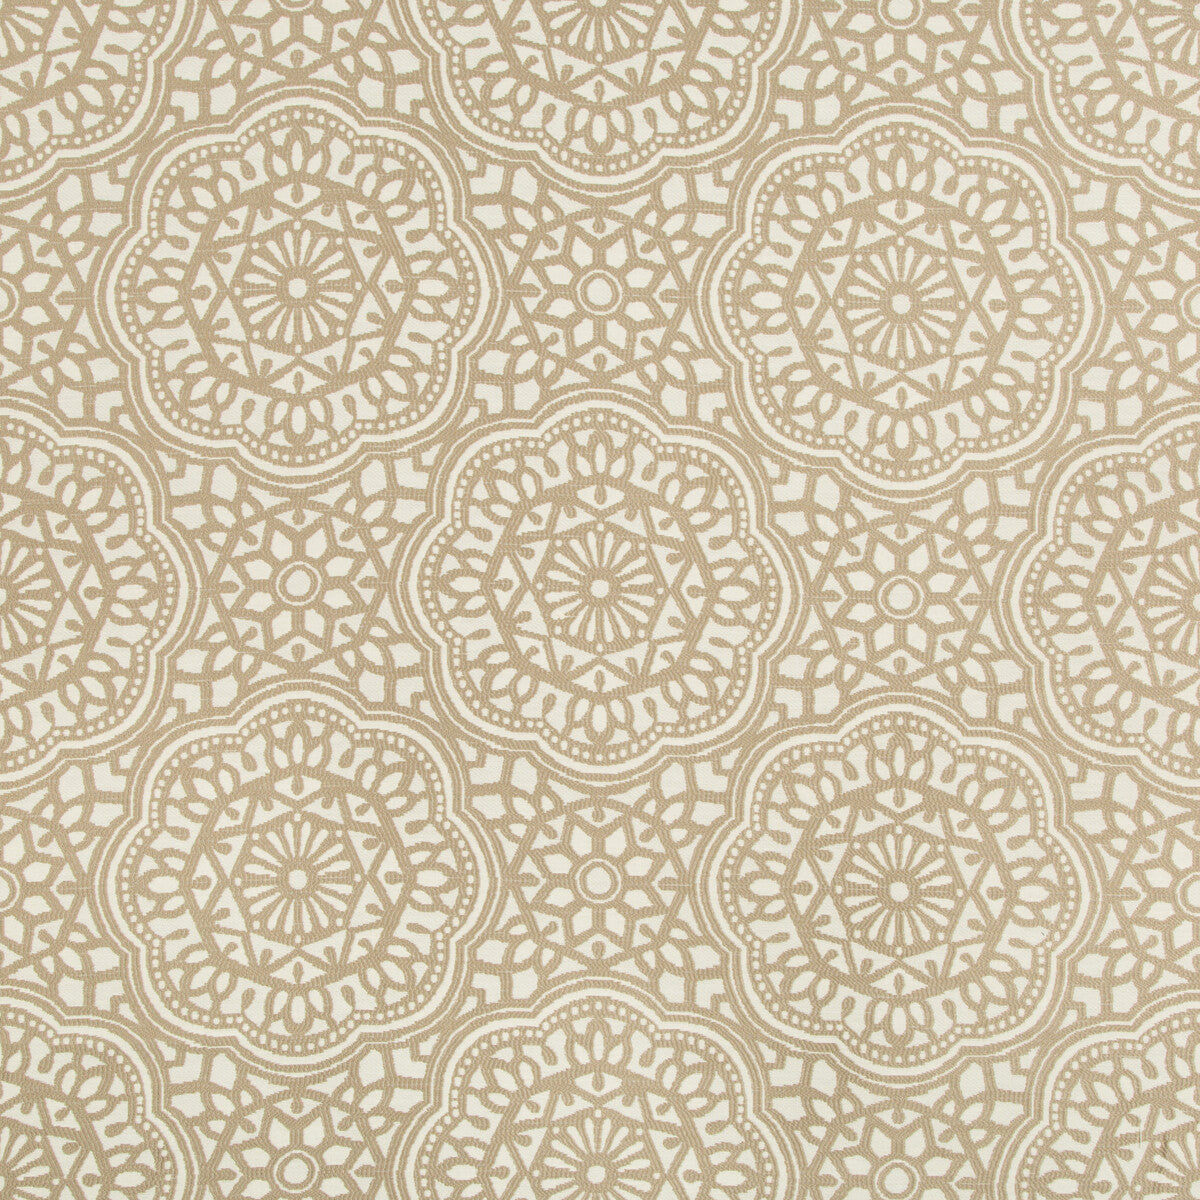 Kravet Design fabric in 35171-106 color - pattern 35171.106.0 - by Kravet Design in the Performance Crypton Home collection